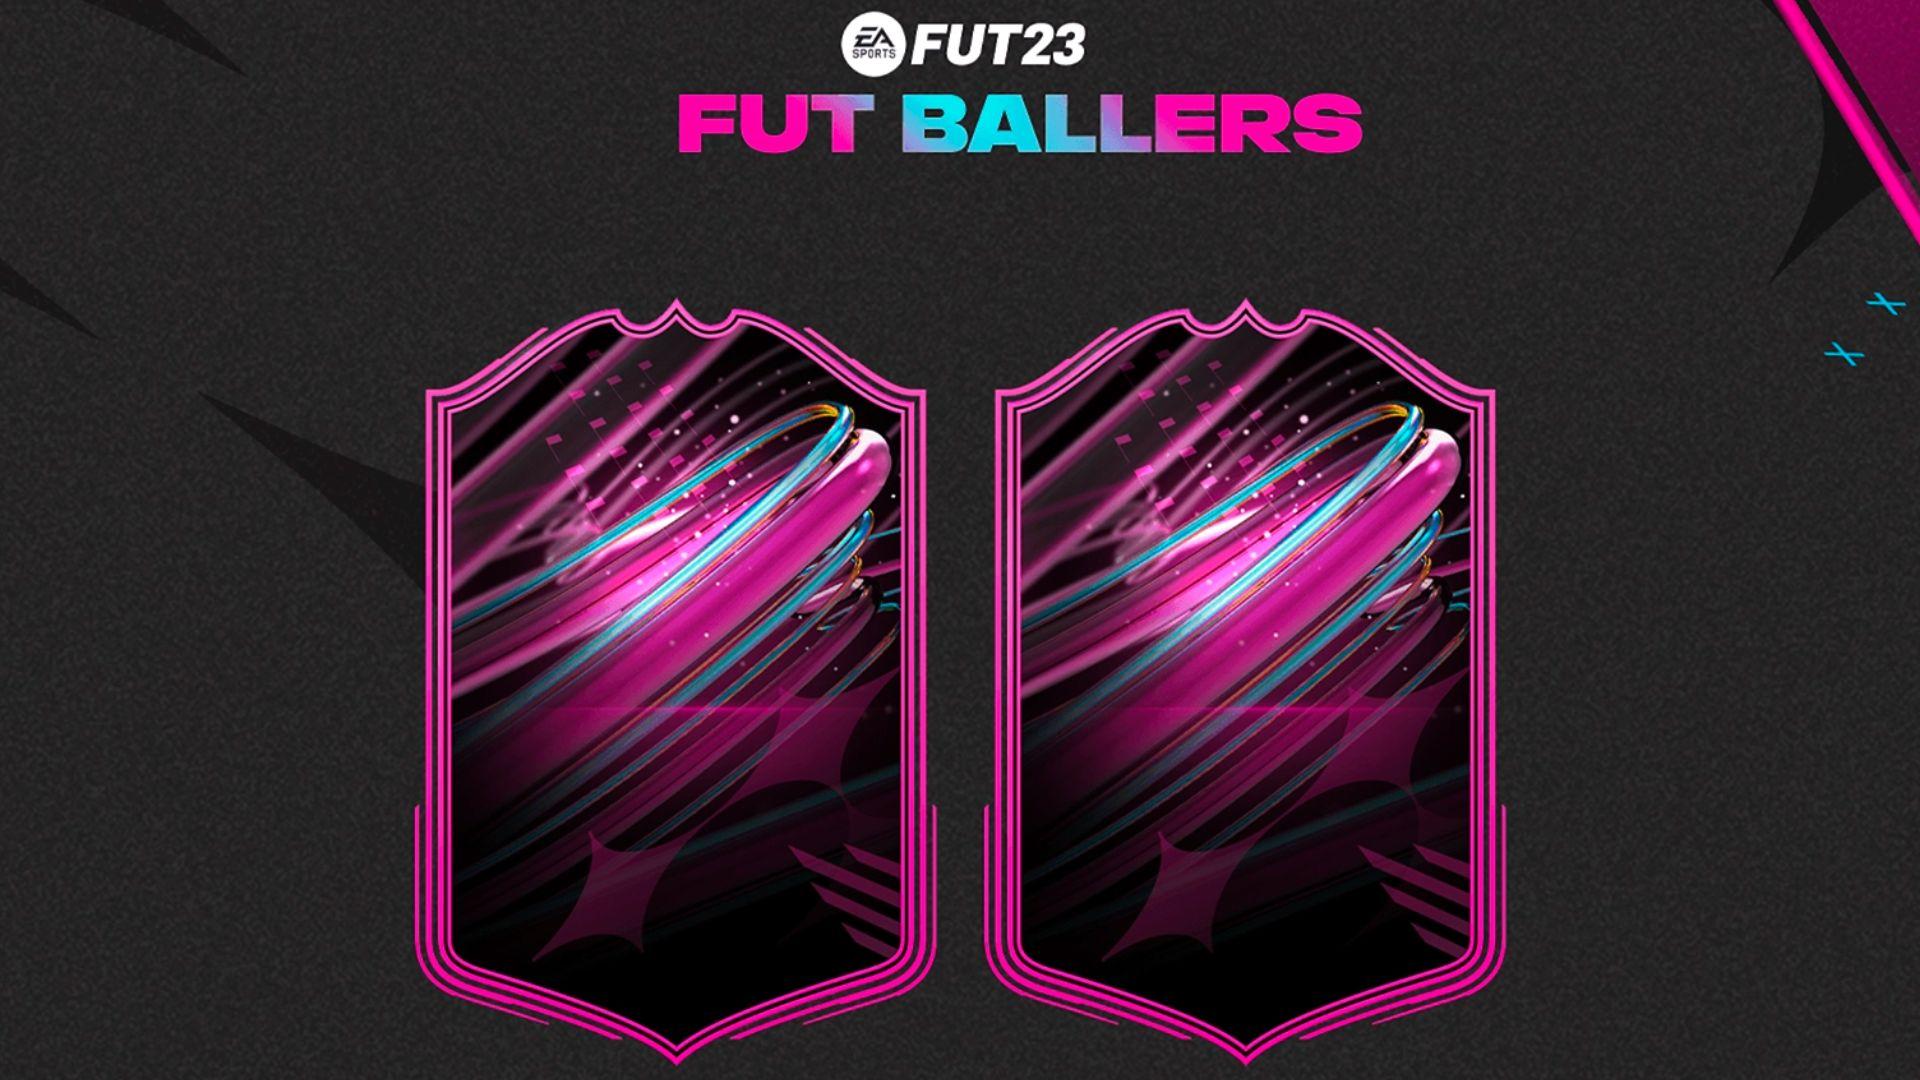 FIFA 23 FUT Ballers loading screen and cards